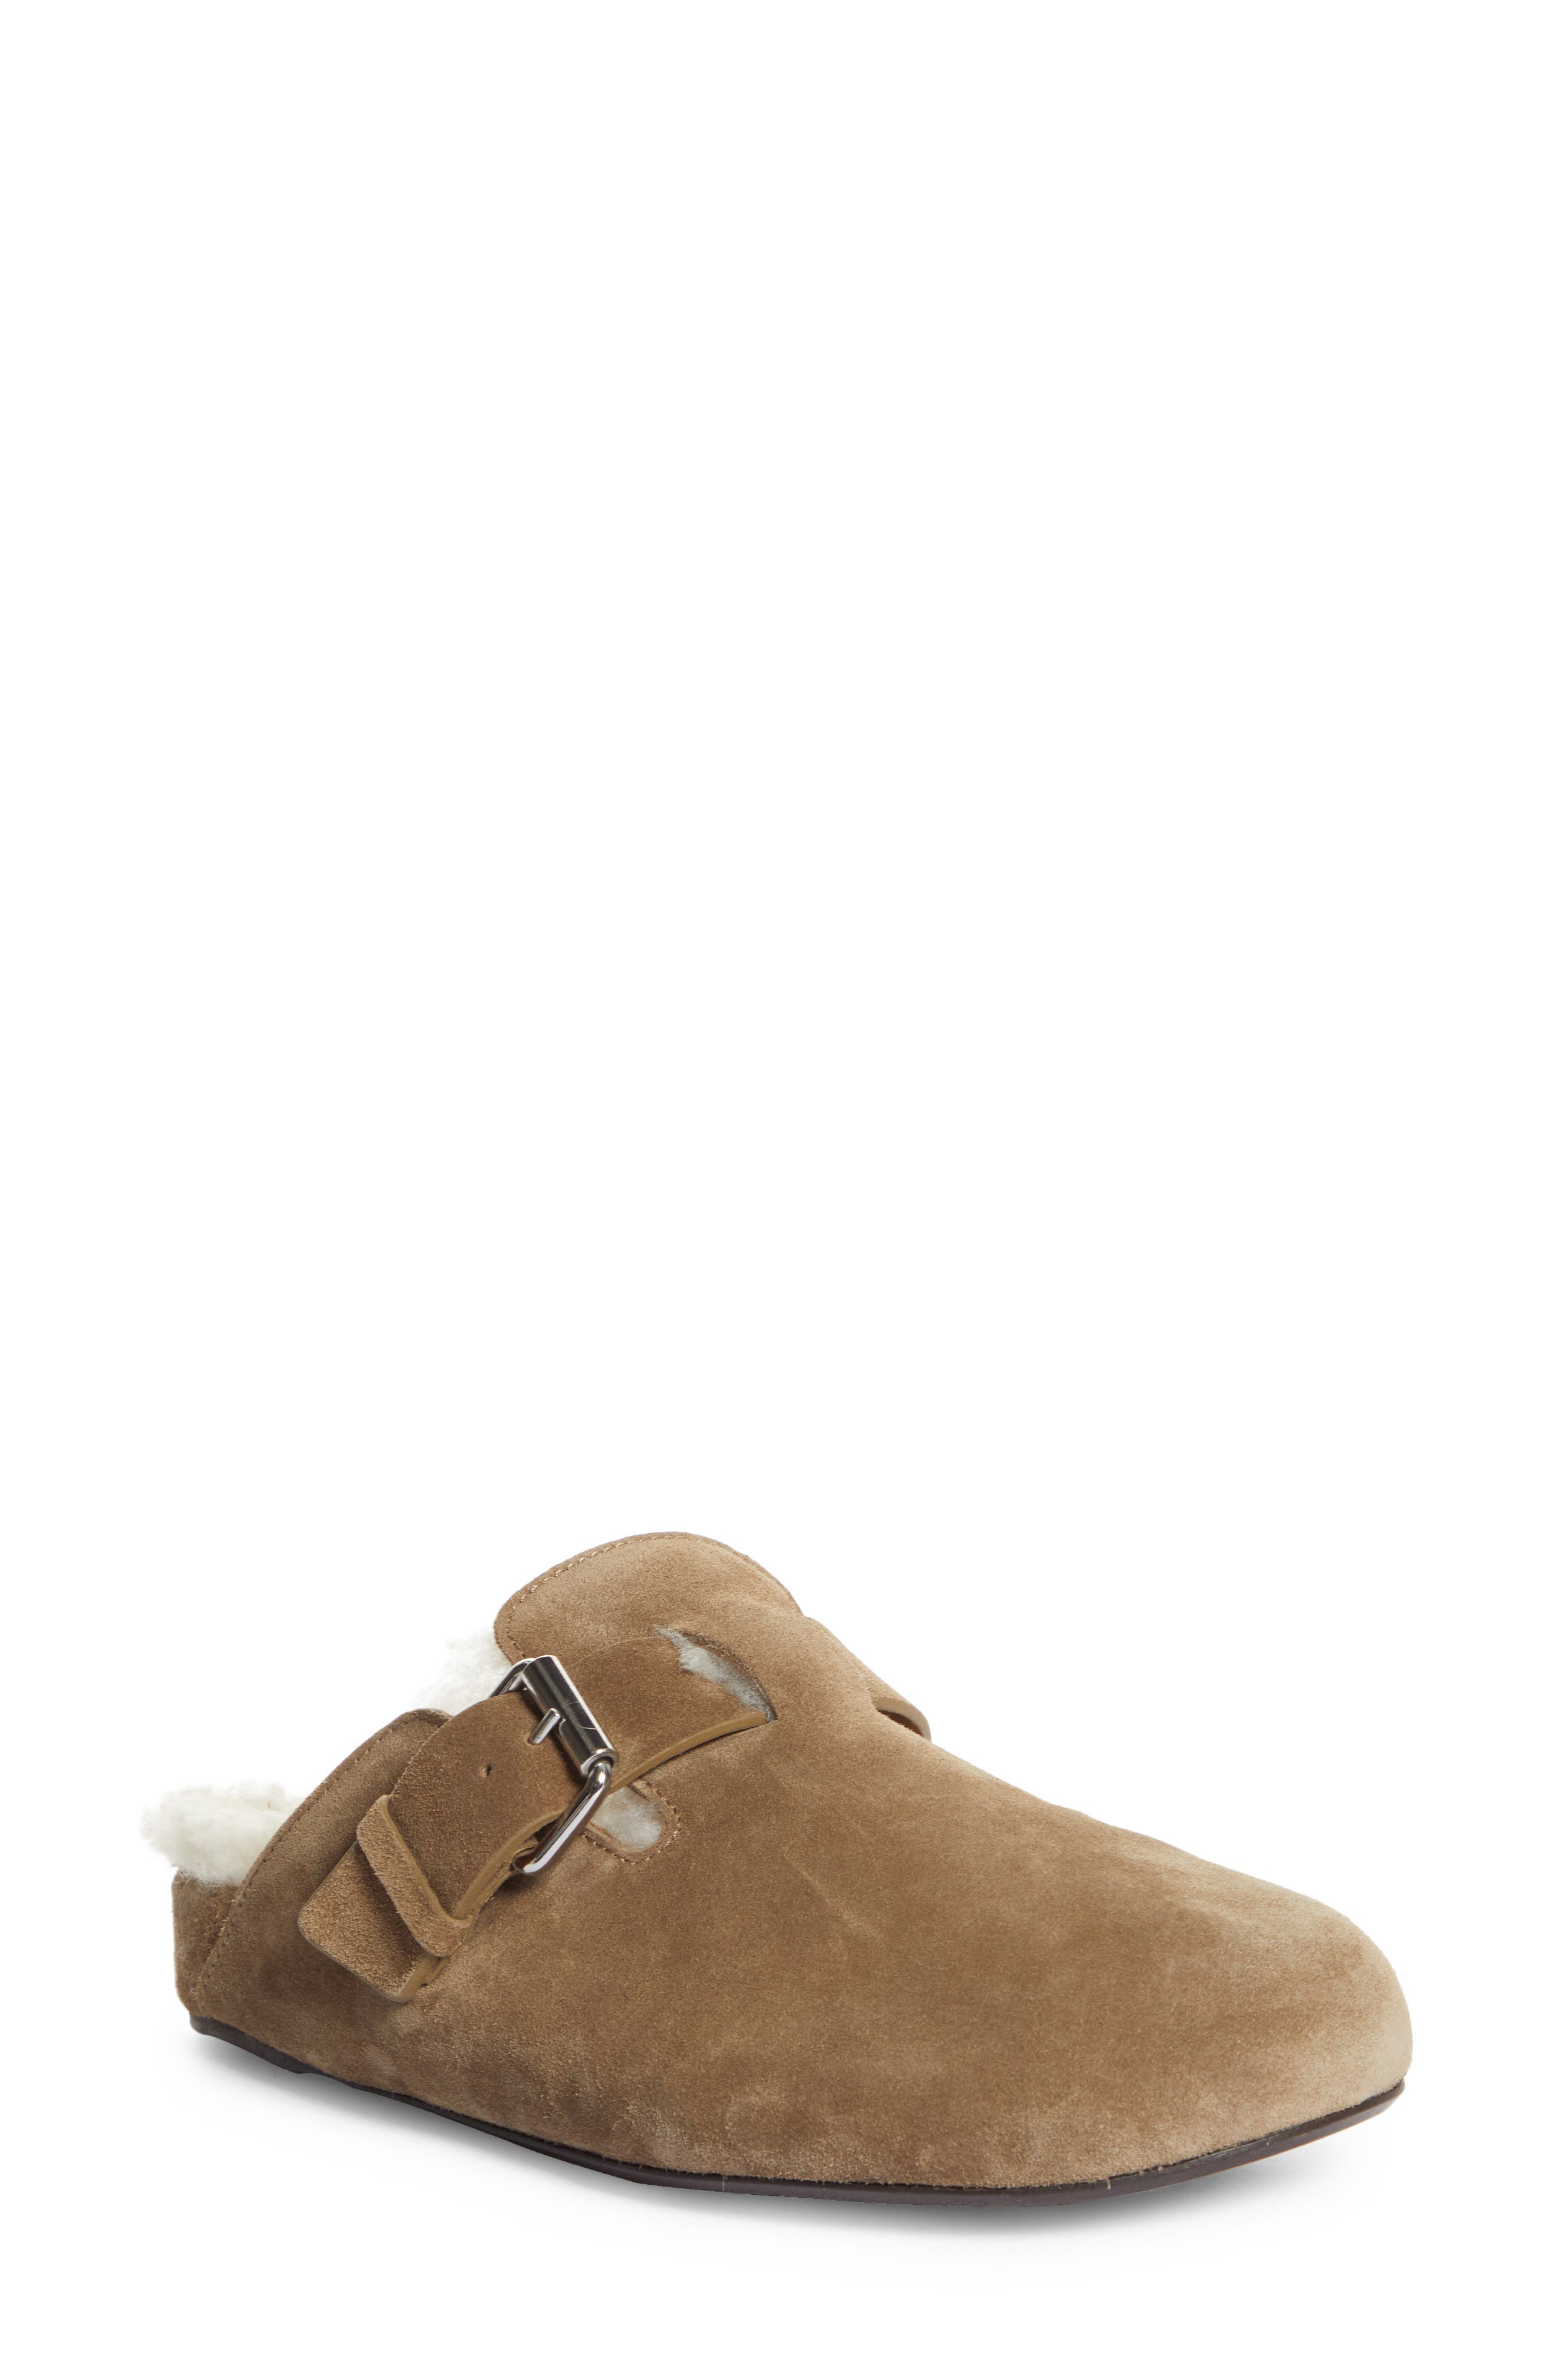 Isabel Marant Mirvin Genuine Shearling Lined Clog in Taupe